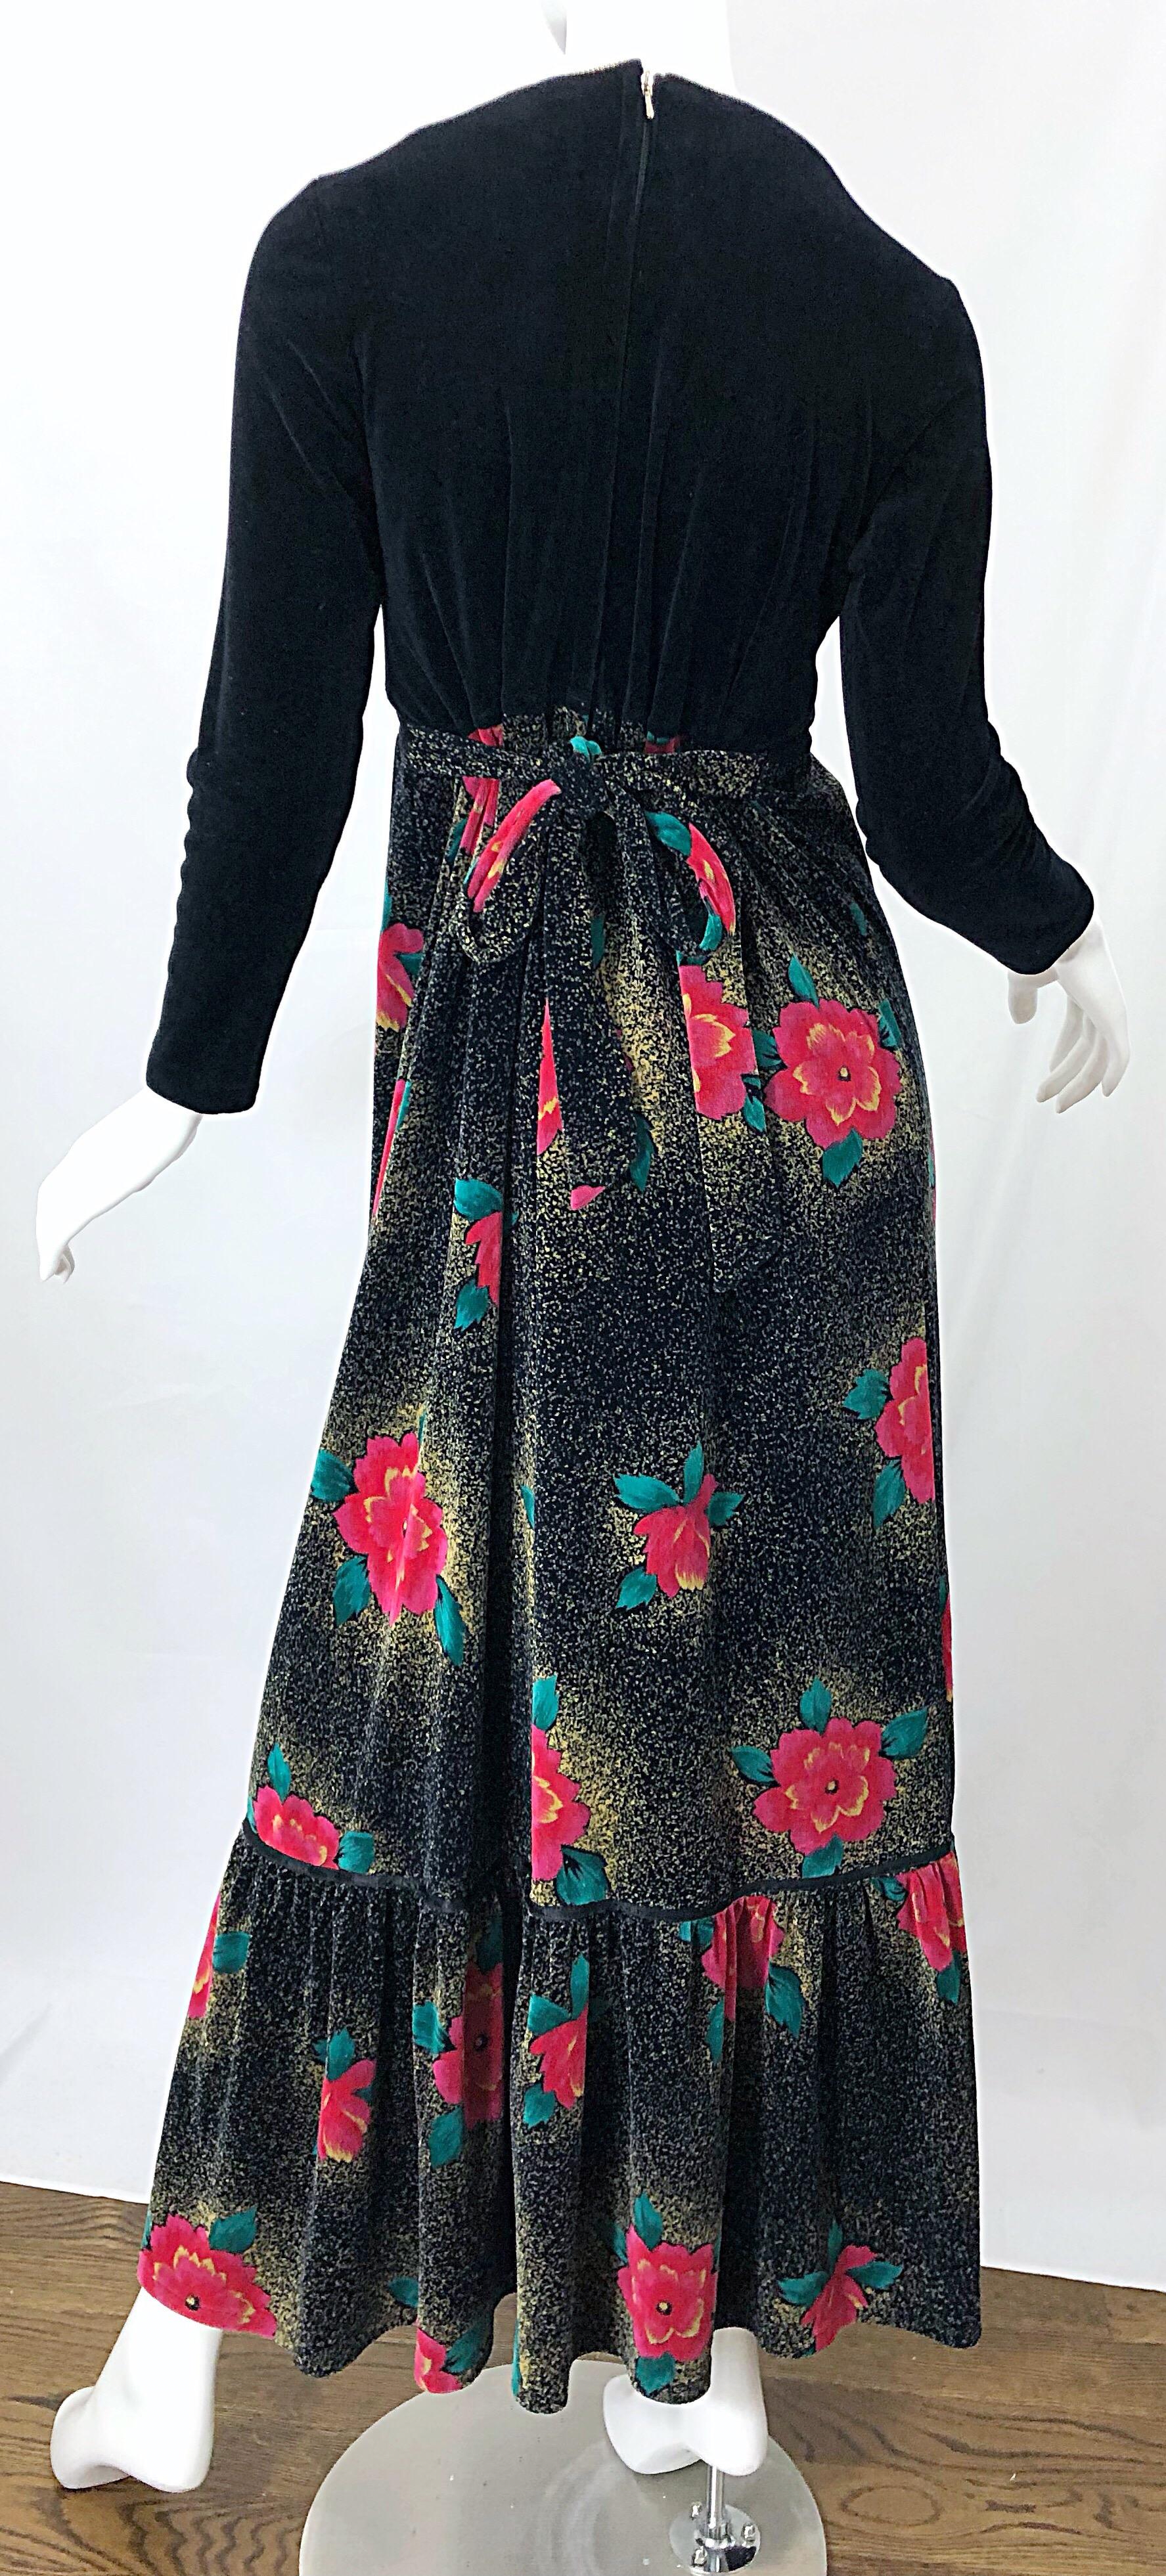 1970s Poinsettia Print Embroidered Beaded Velvet Velour Holiday Maxi Dress Gown In Excellent Condition For Sale In San Diego, CA